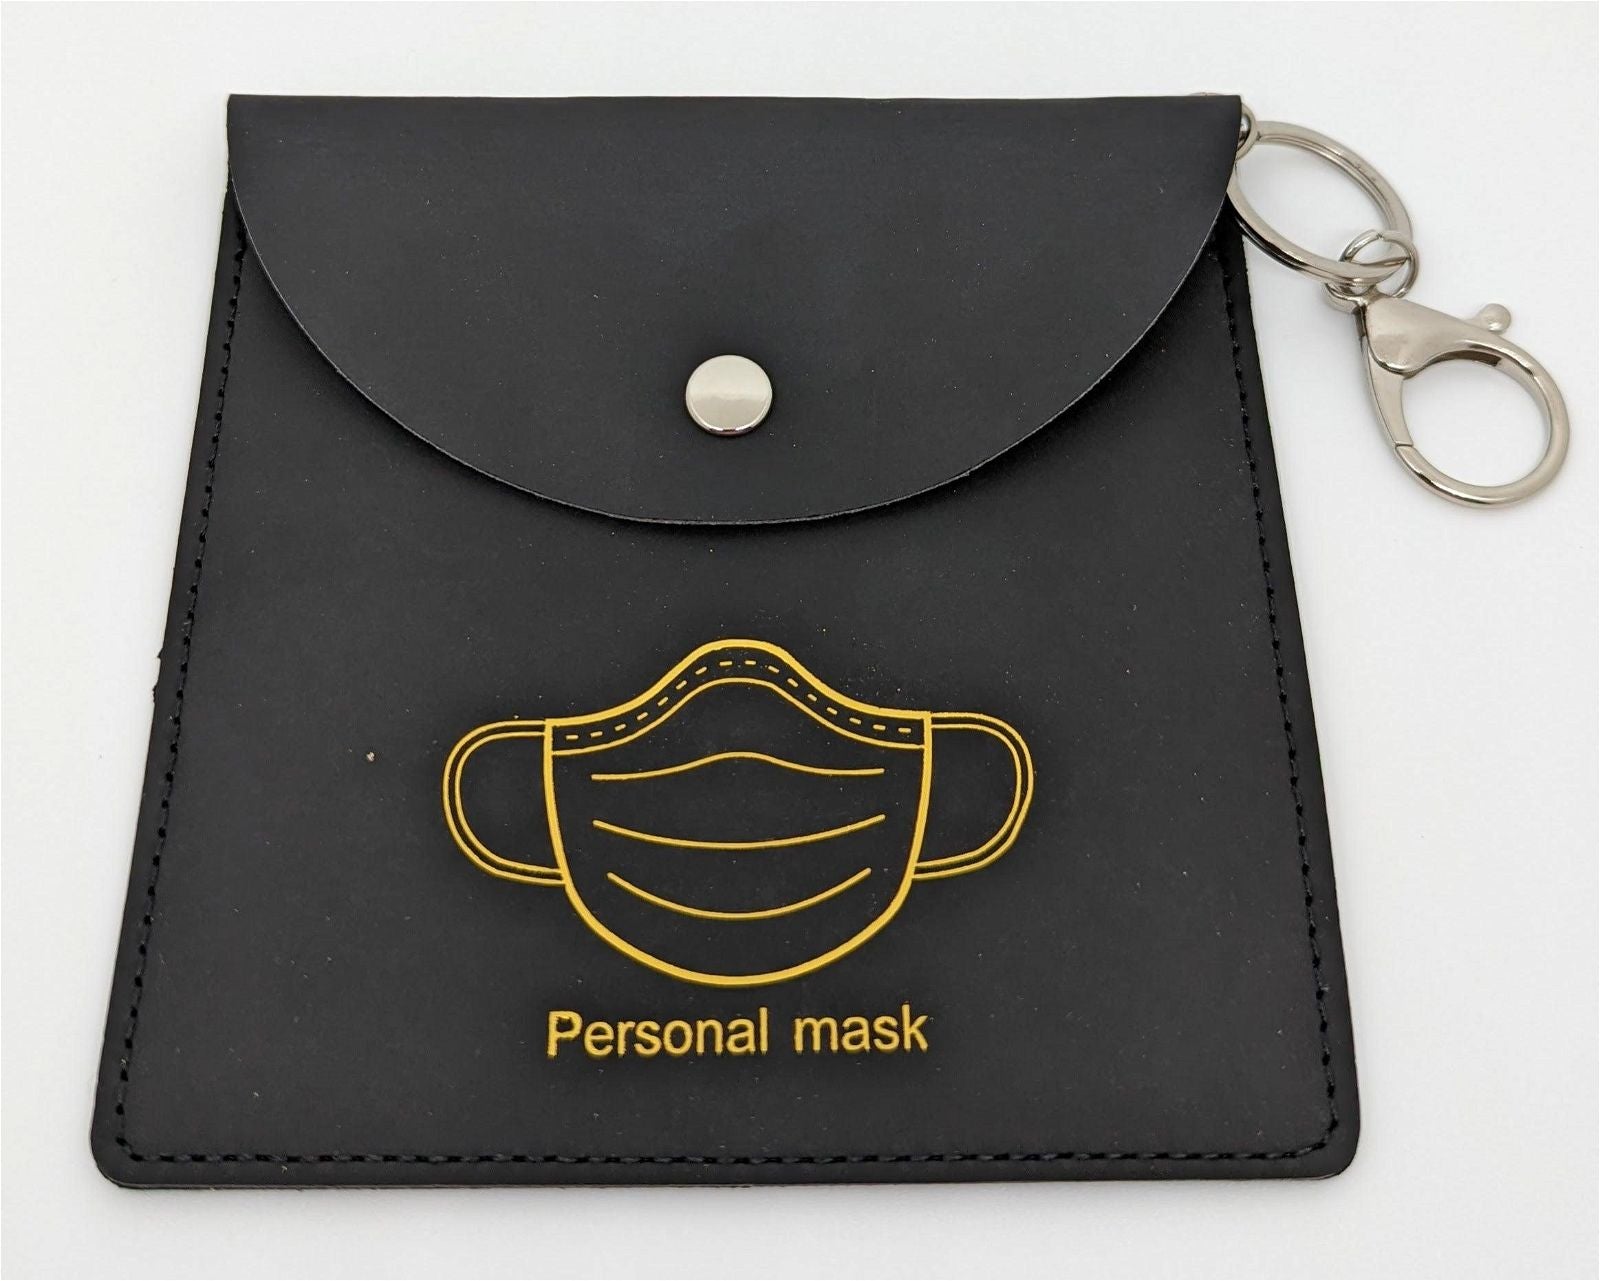 Luxury Mask Wallet - Maily's Classic Accessories